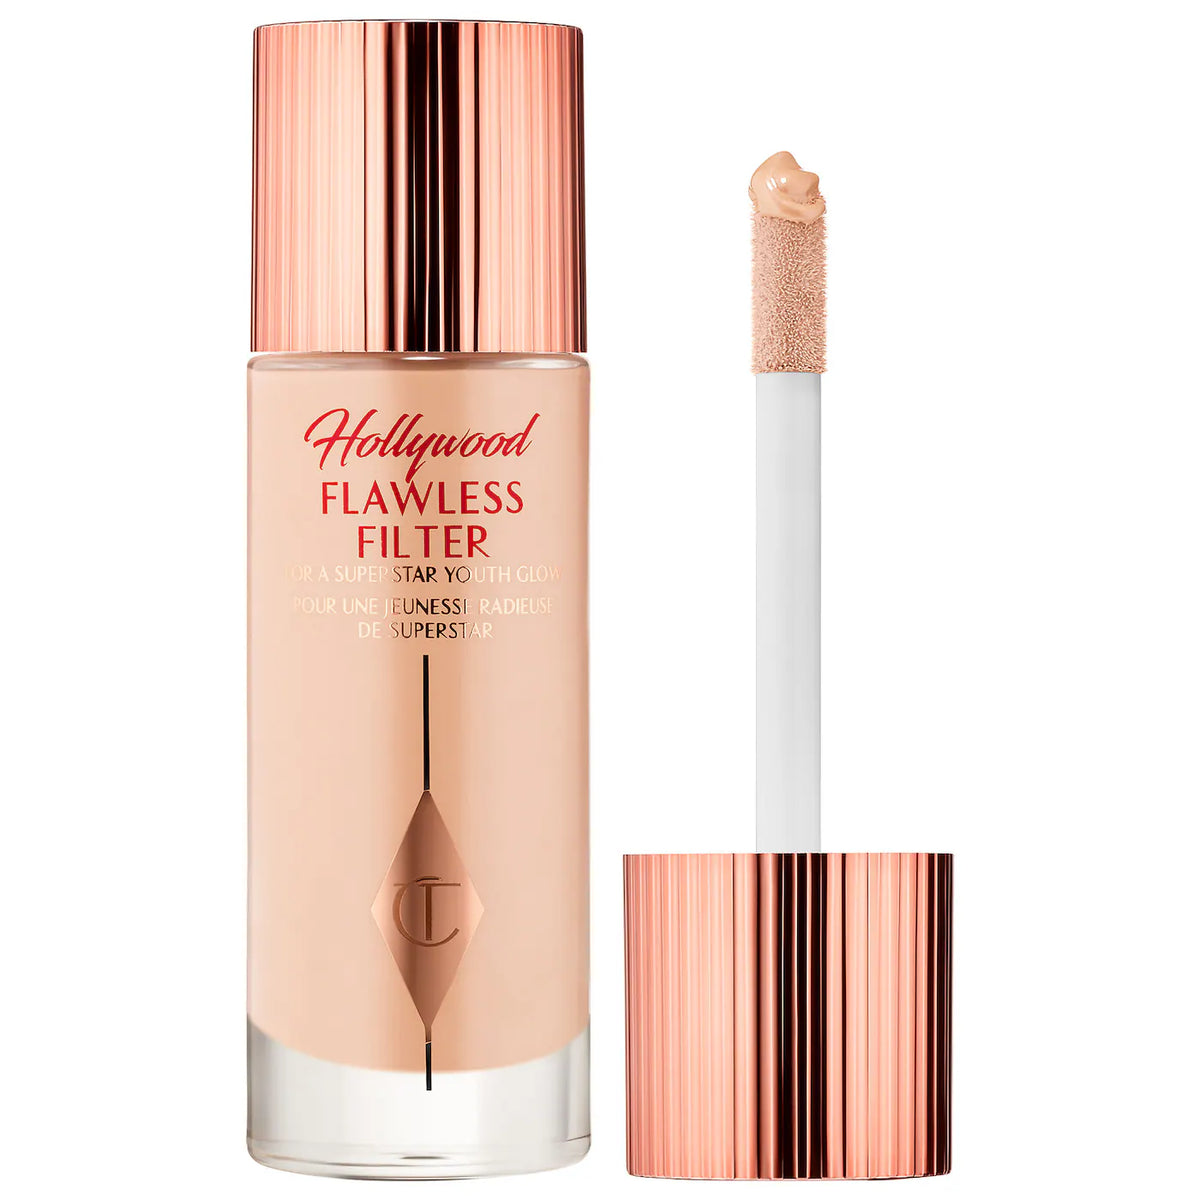 Charlotte Tilbury Hollywood Flawless Filter Liquid filter Volare Makeup   